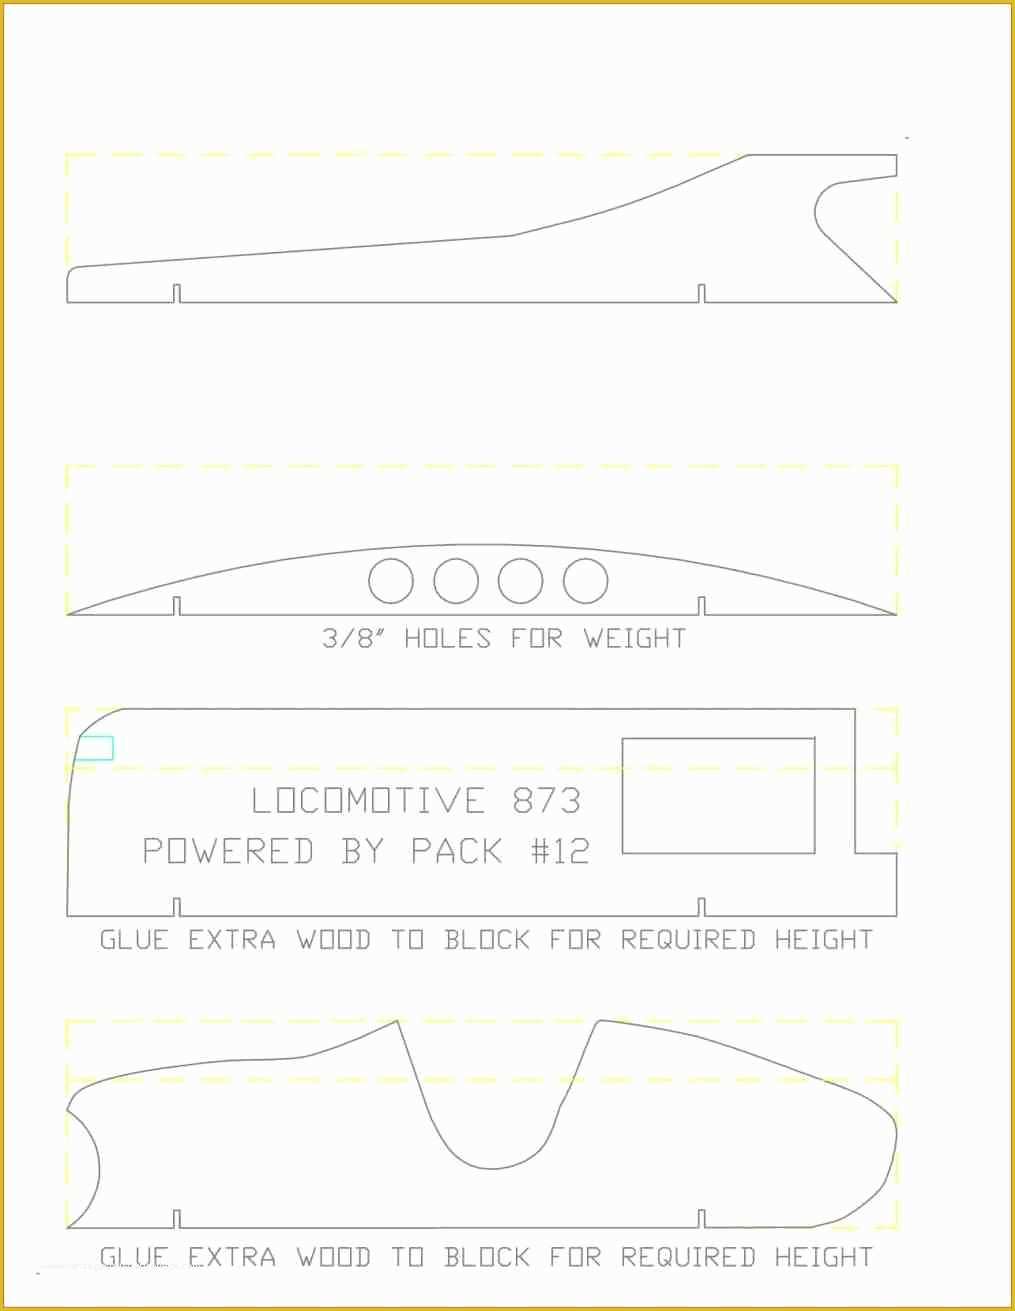 Free Pinewood Derby Car Templates Download Of Templates sop Example Images Of Fish Car Template Pdf